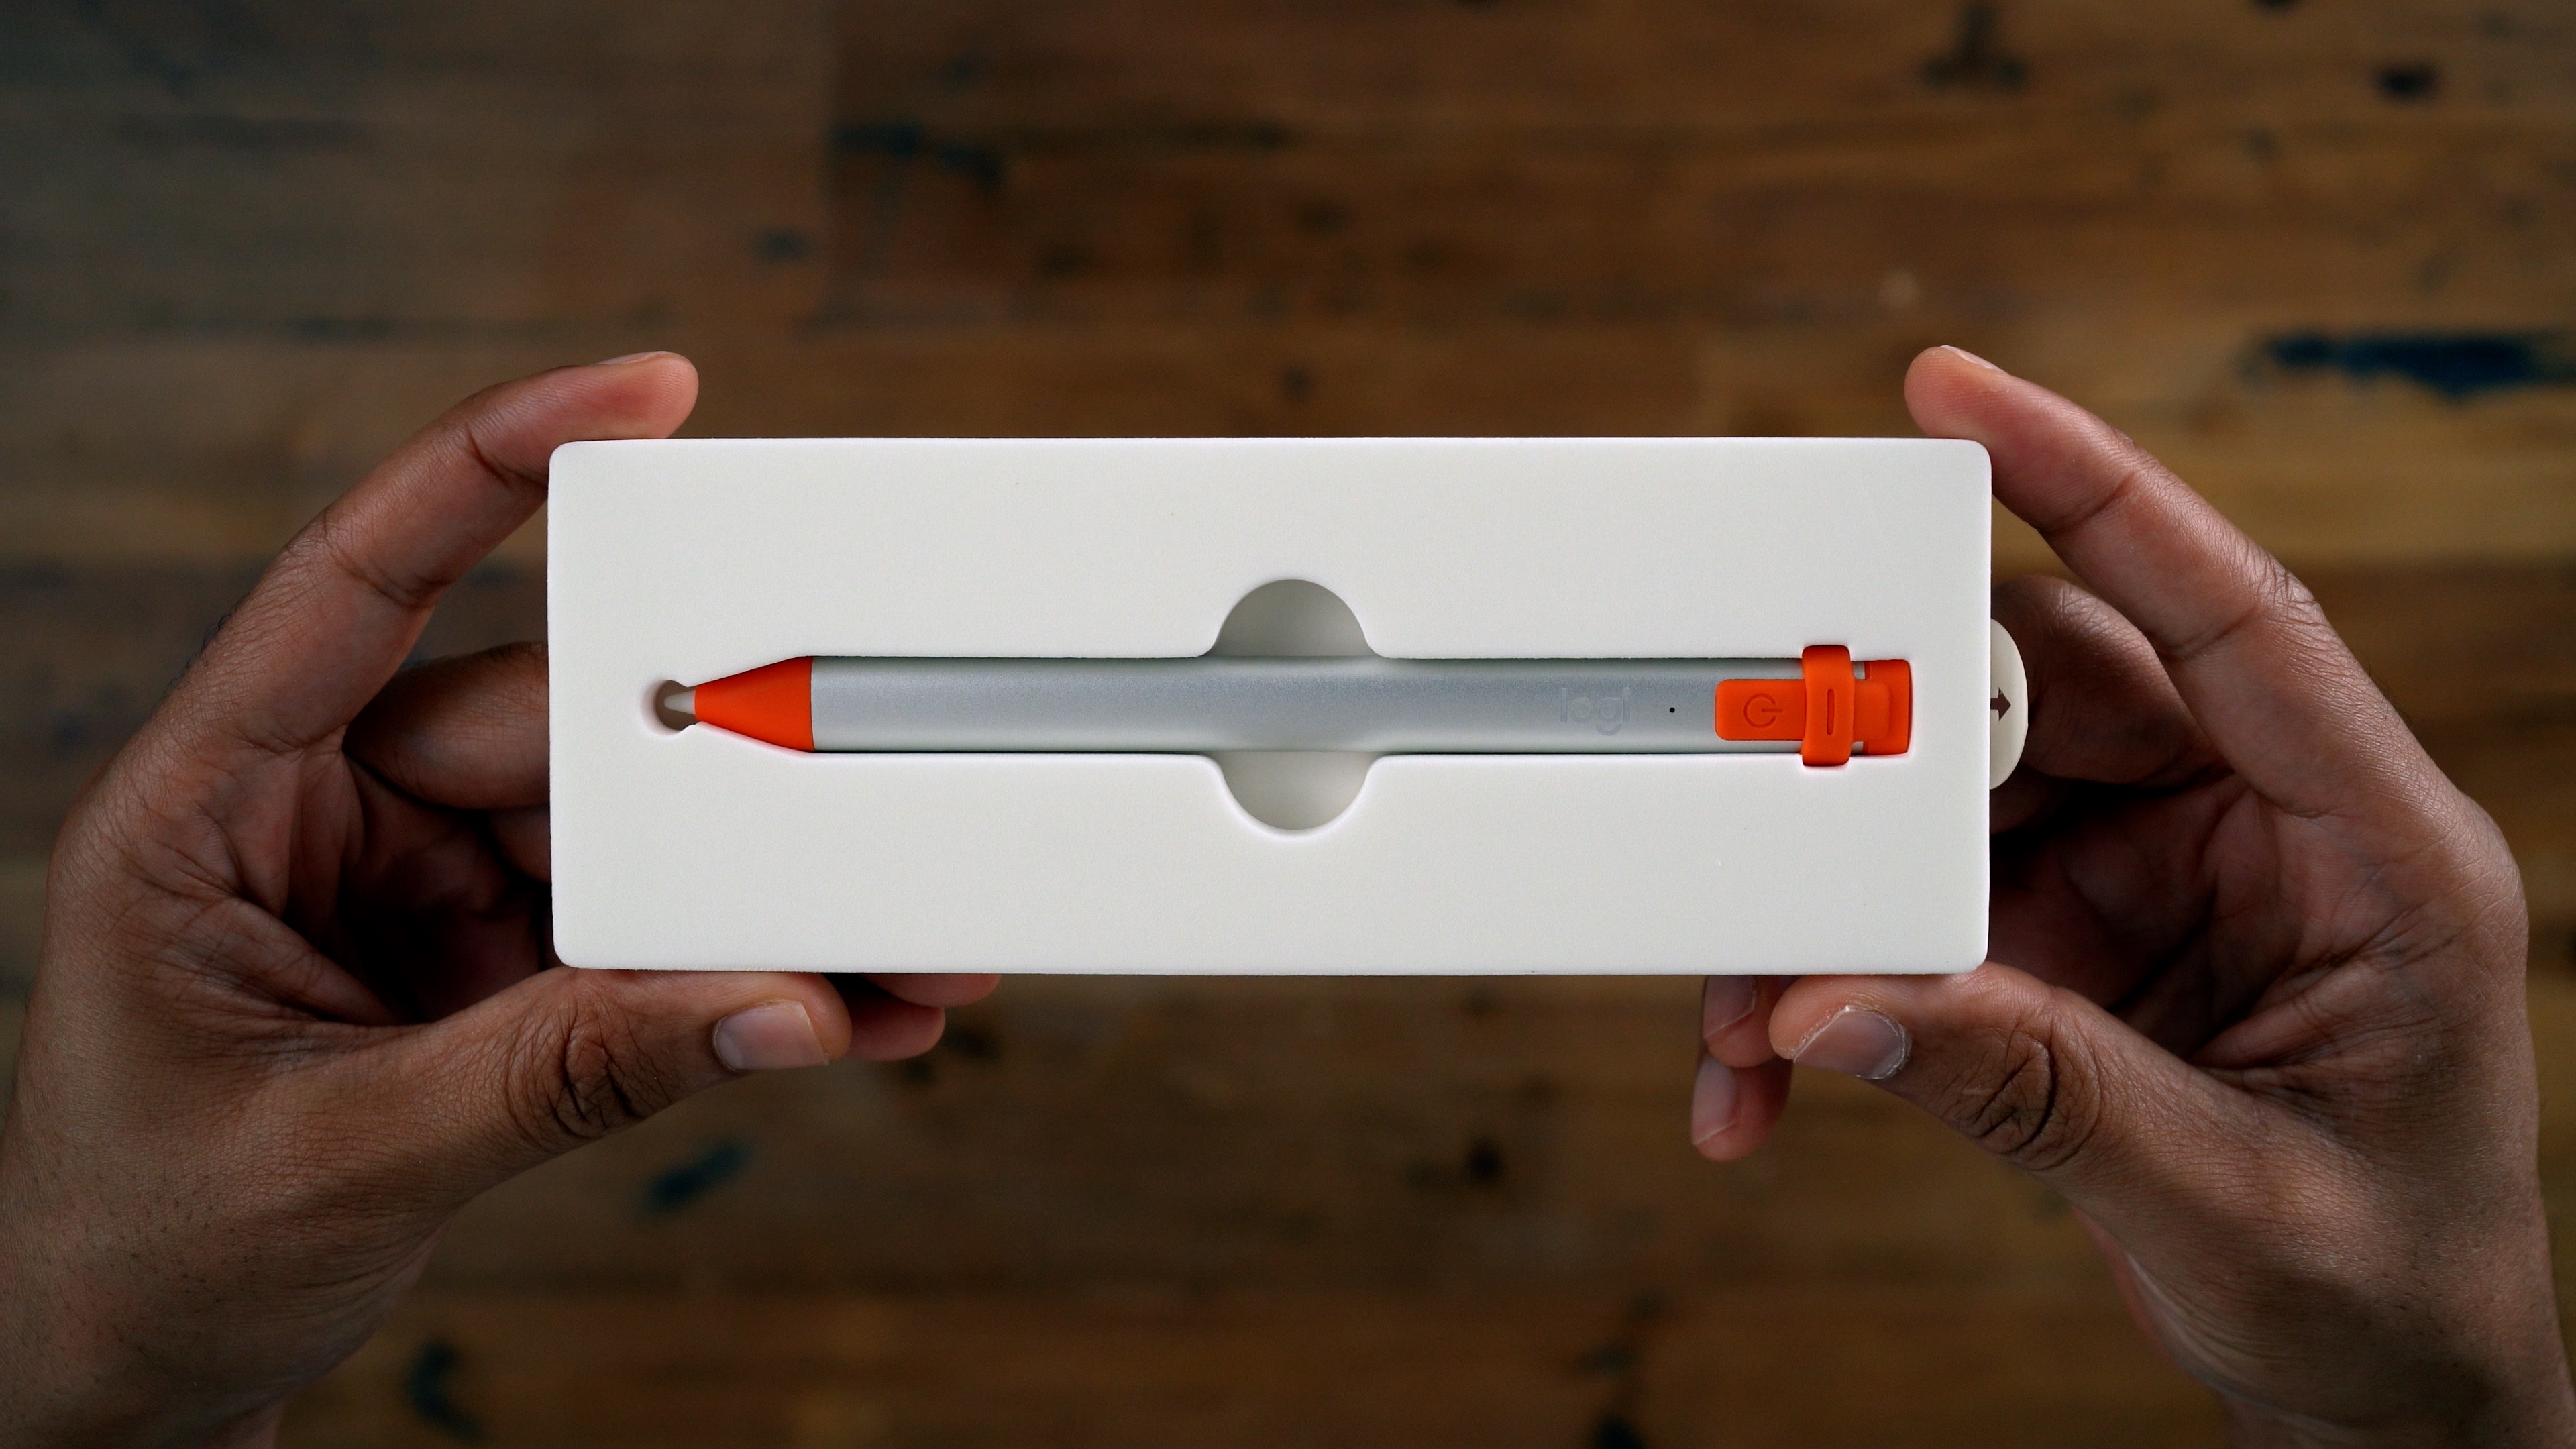 Hands-on: Apple Pencil unboxing with iPad Pro [Gallery] - 9to5Mac